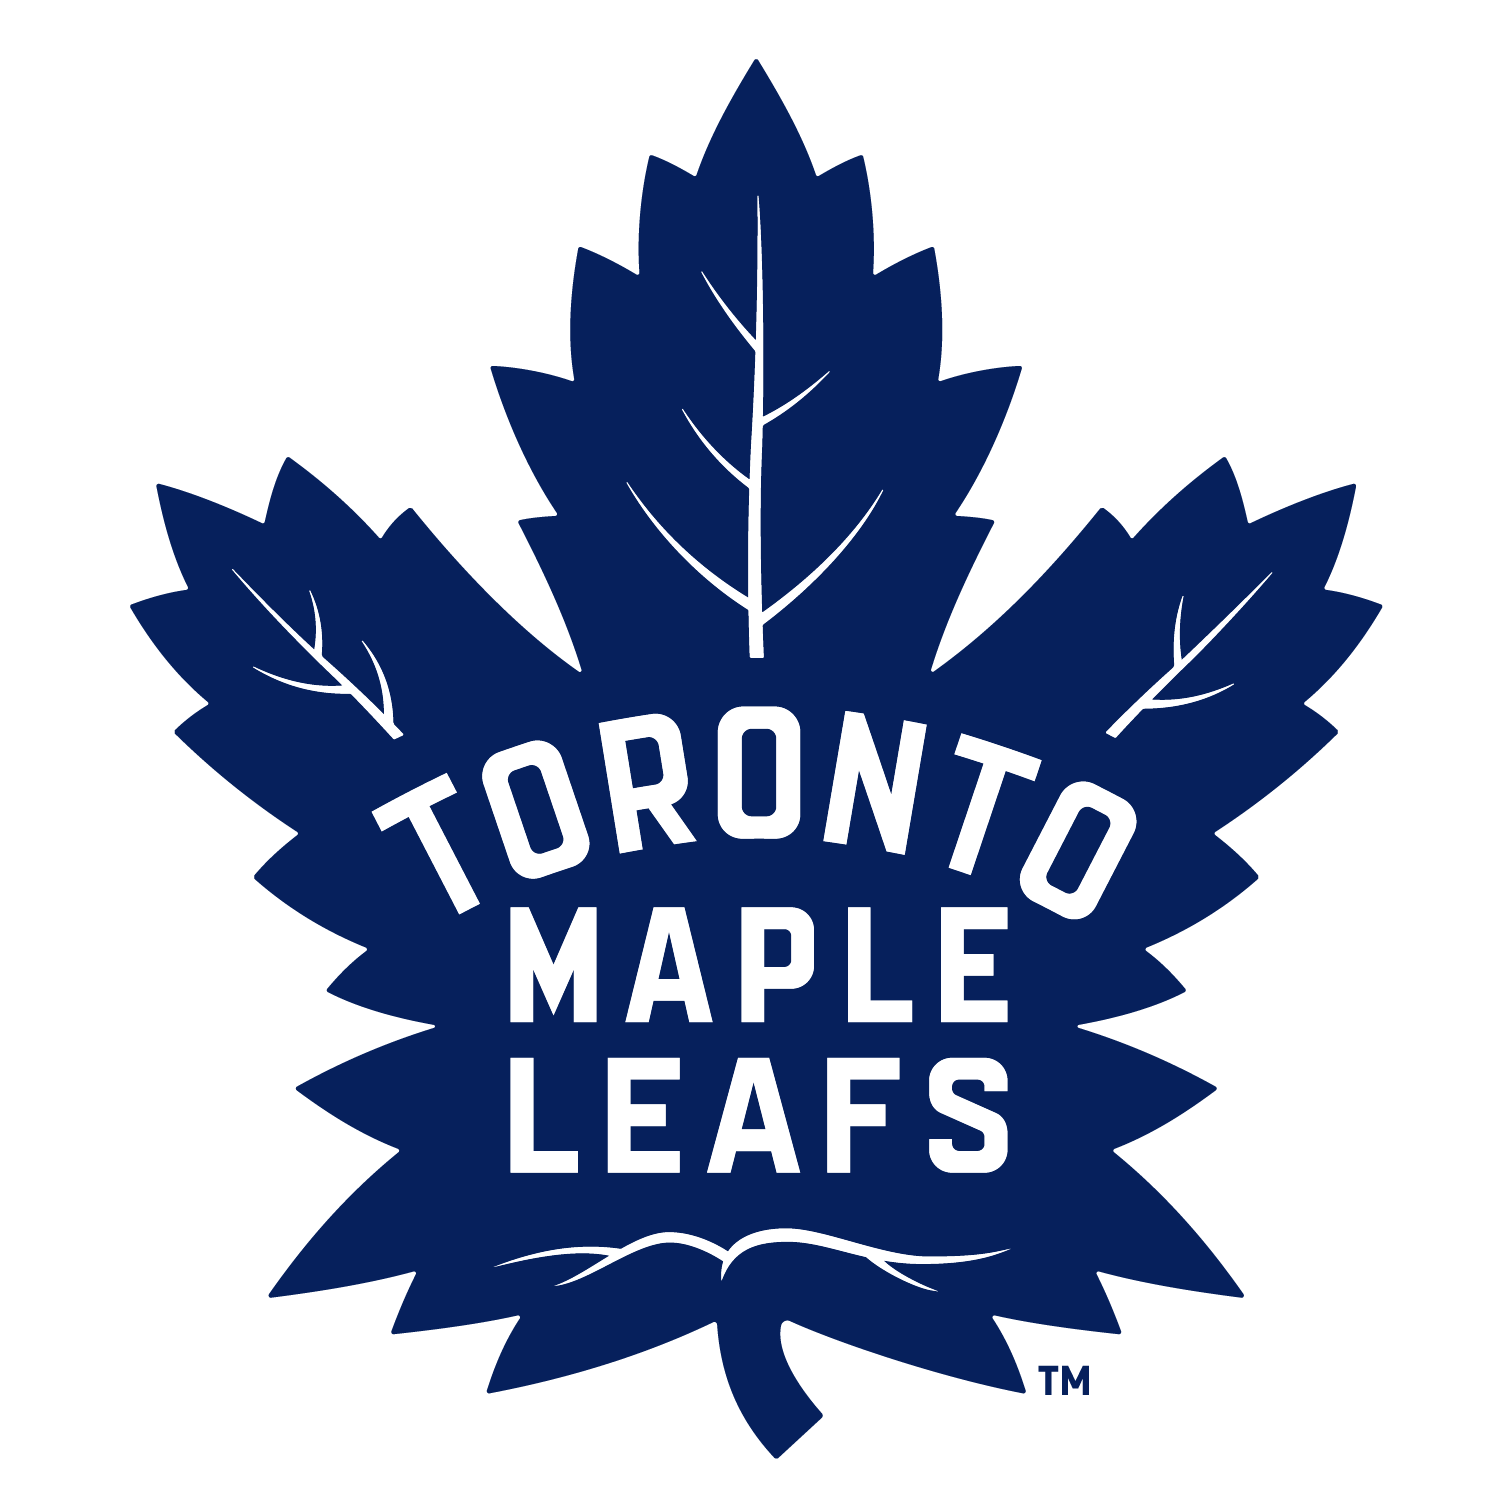 Shop Toronto Maple Leafs products